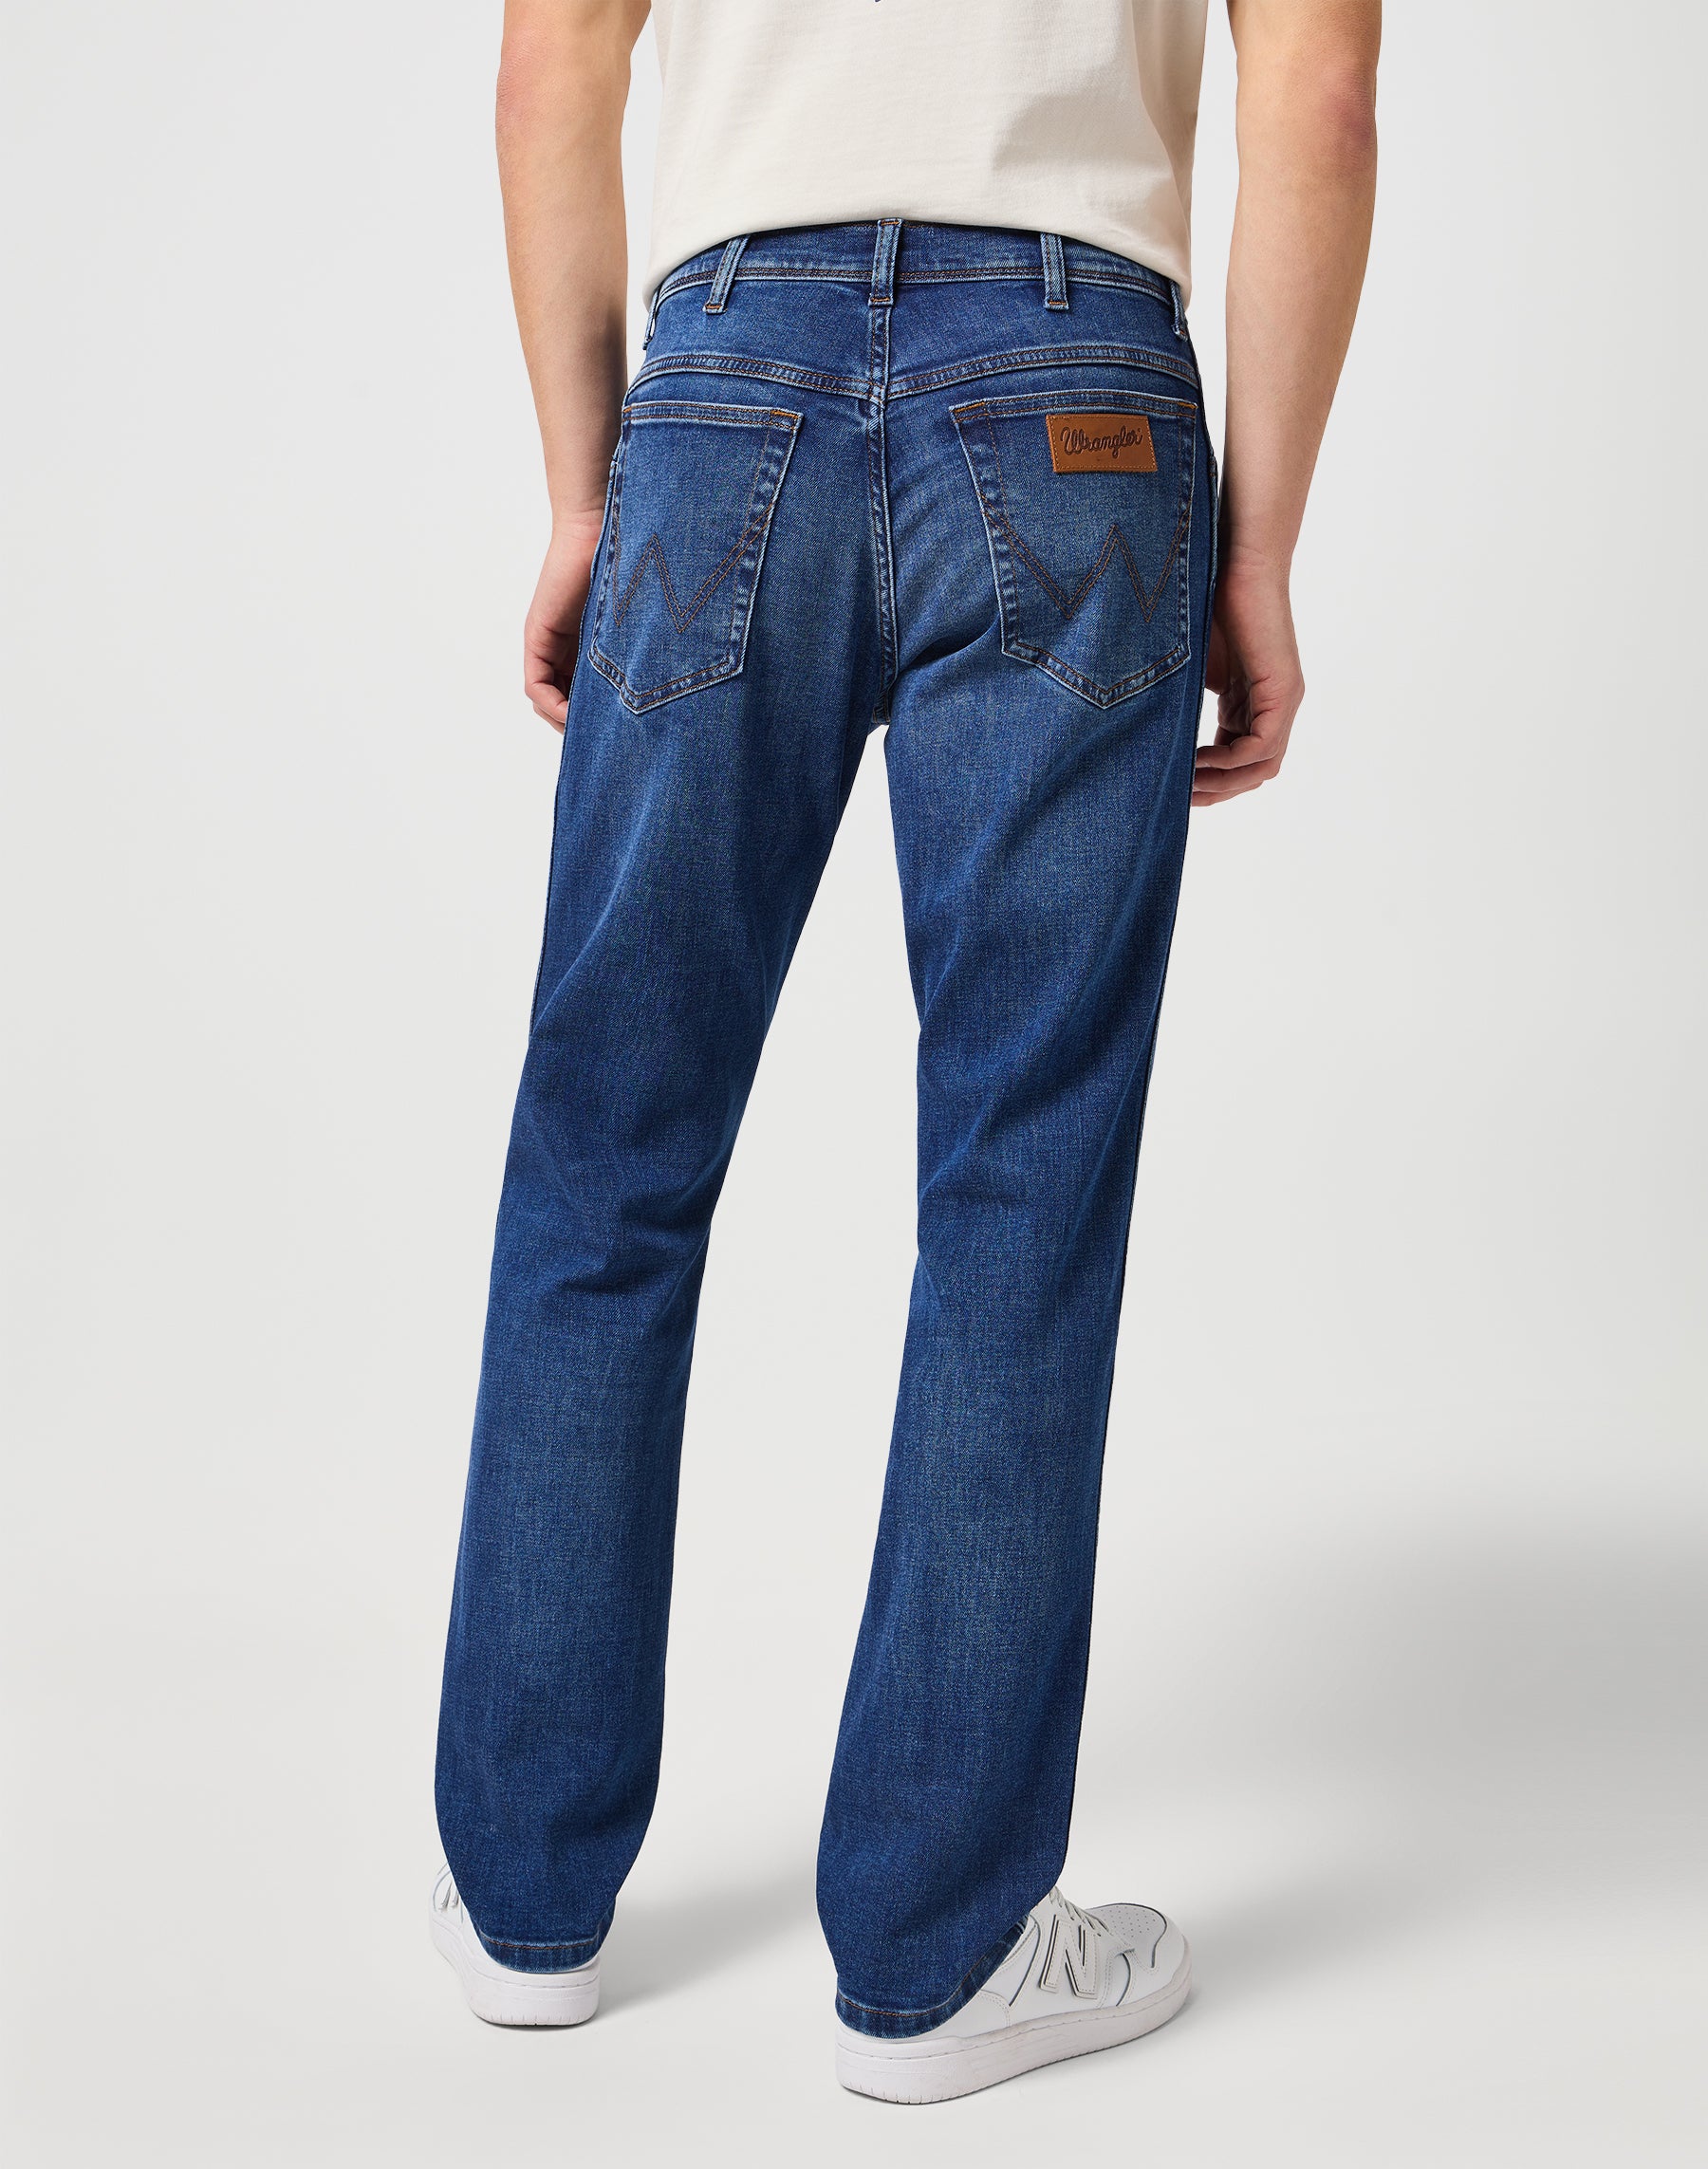 Texas Low Stretch in Dean Jeans Wrangler   